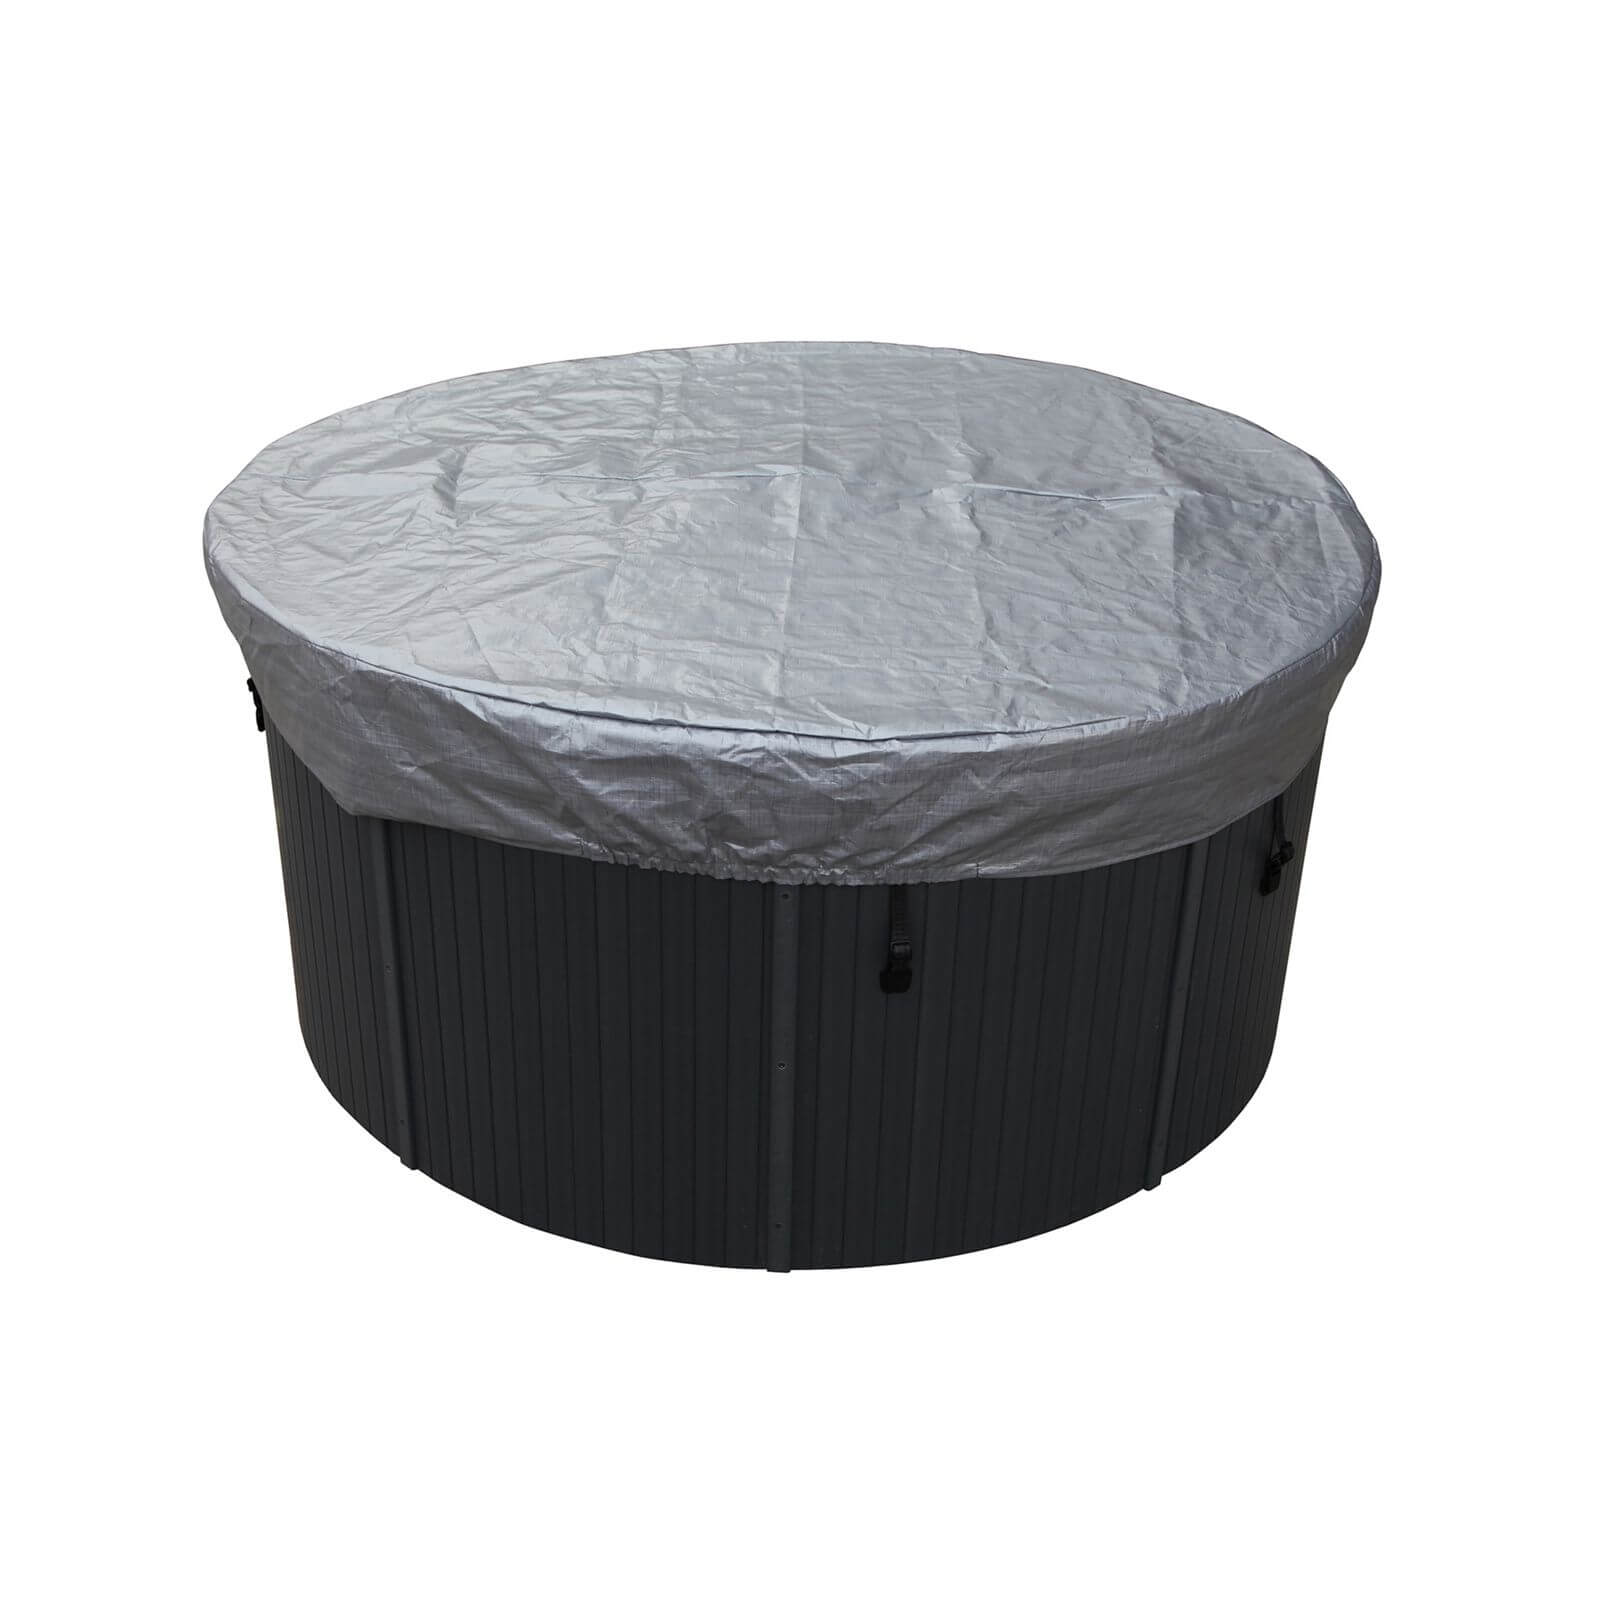 Canadian Spa Round Spa Cover Guard - 84In